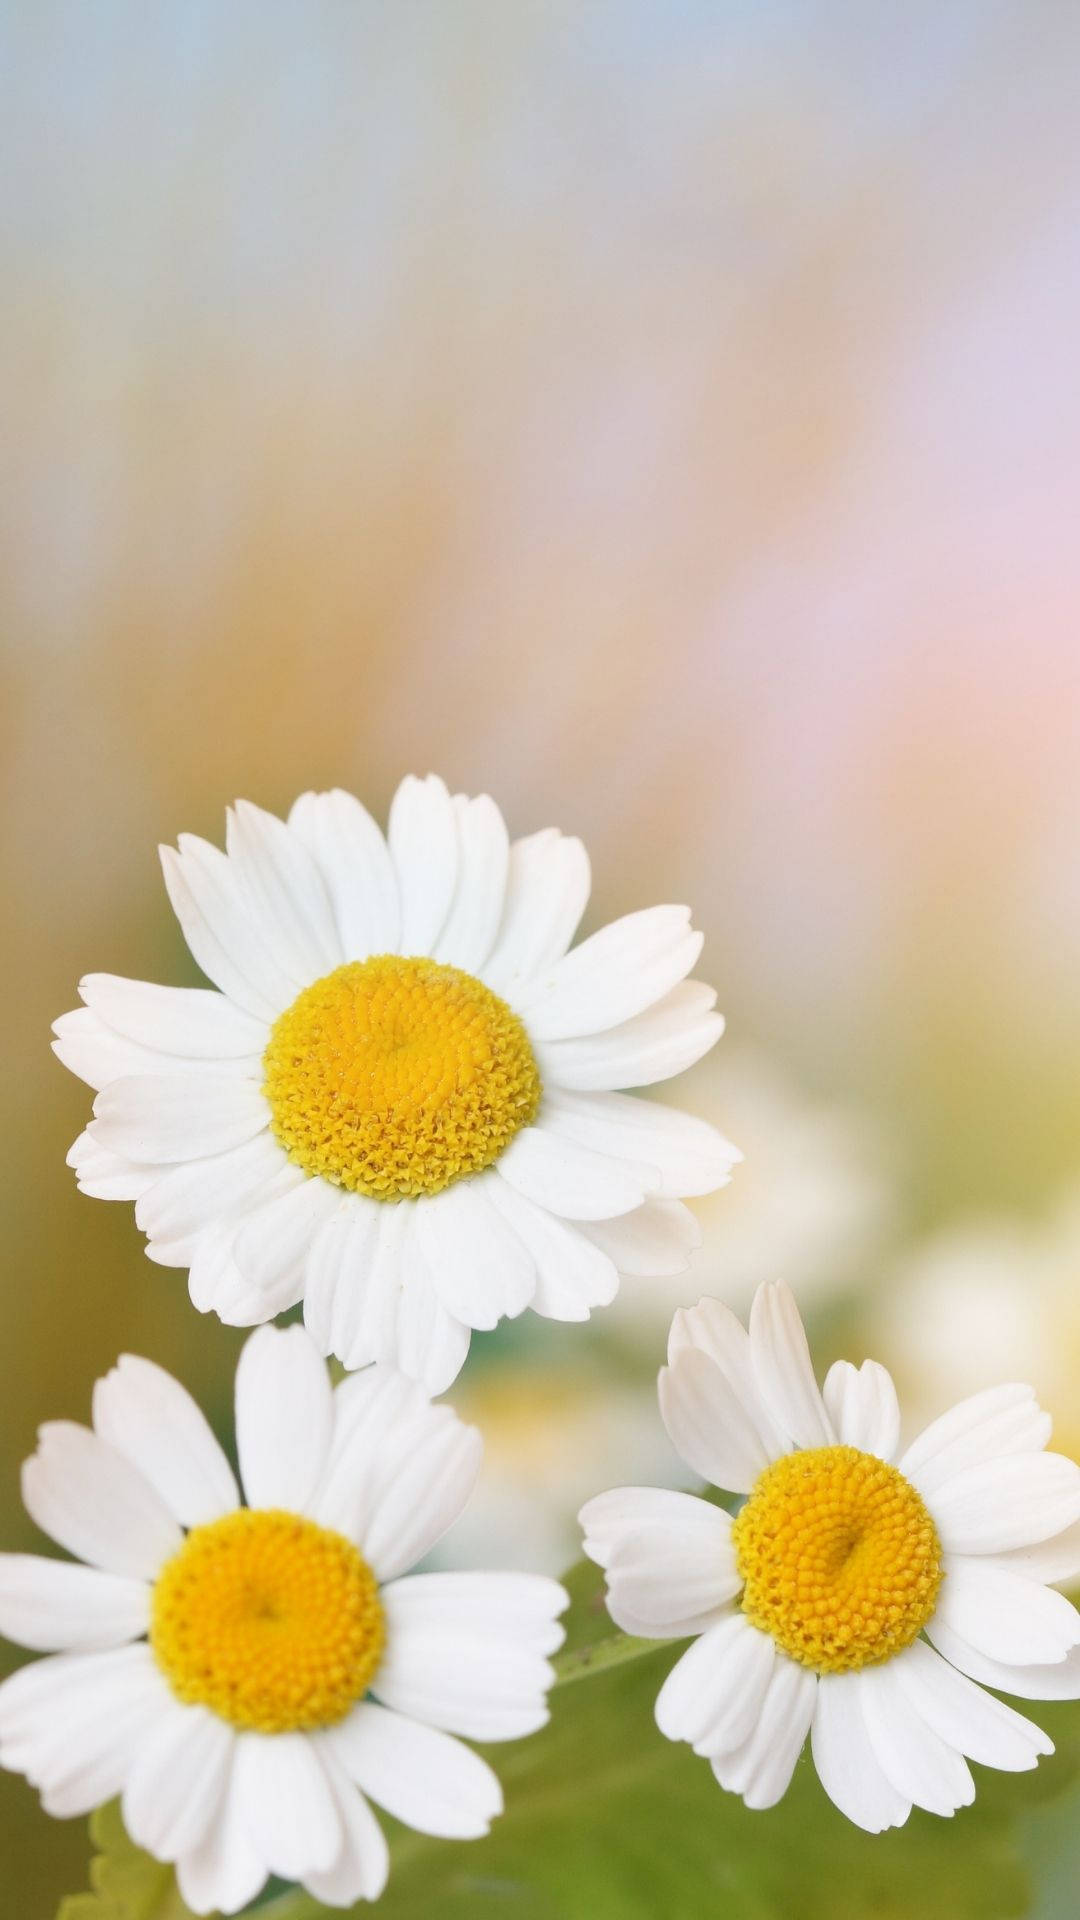 Free Daisy Iphone Wallpaper Downloads, [100+] Daisy Iphone Wallpapers for  FREE 